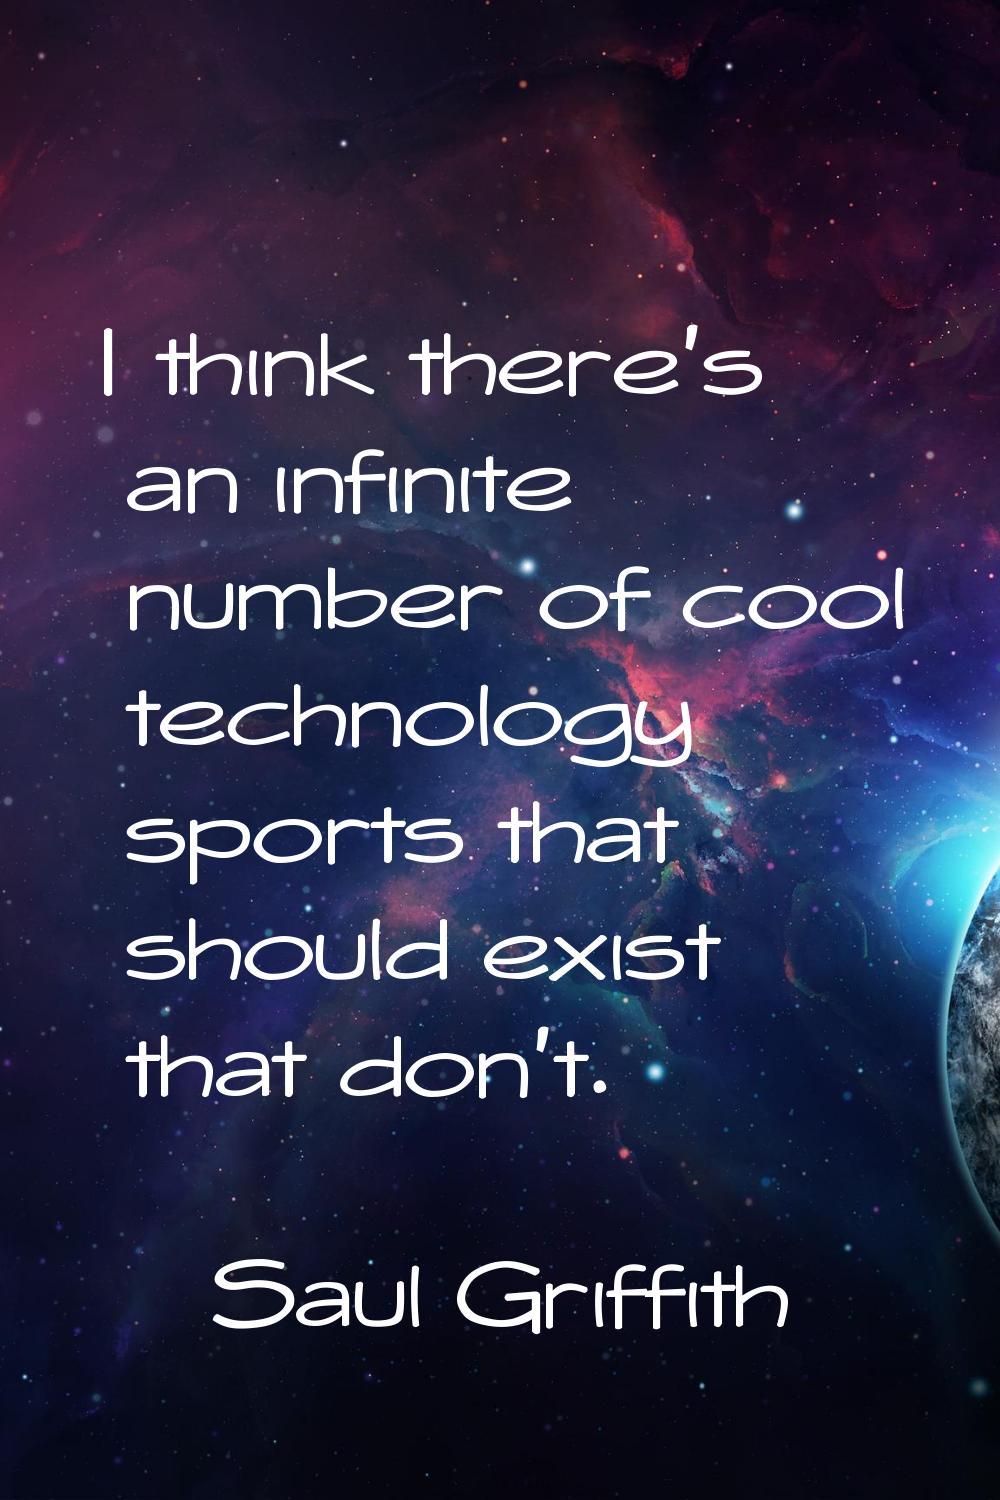 I think there's an infinite number of cool technology sports that should exist that don't.